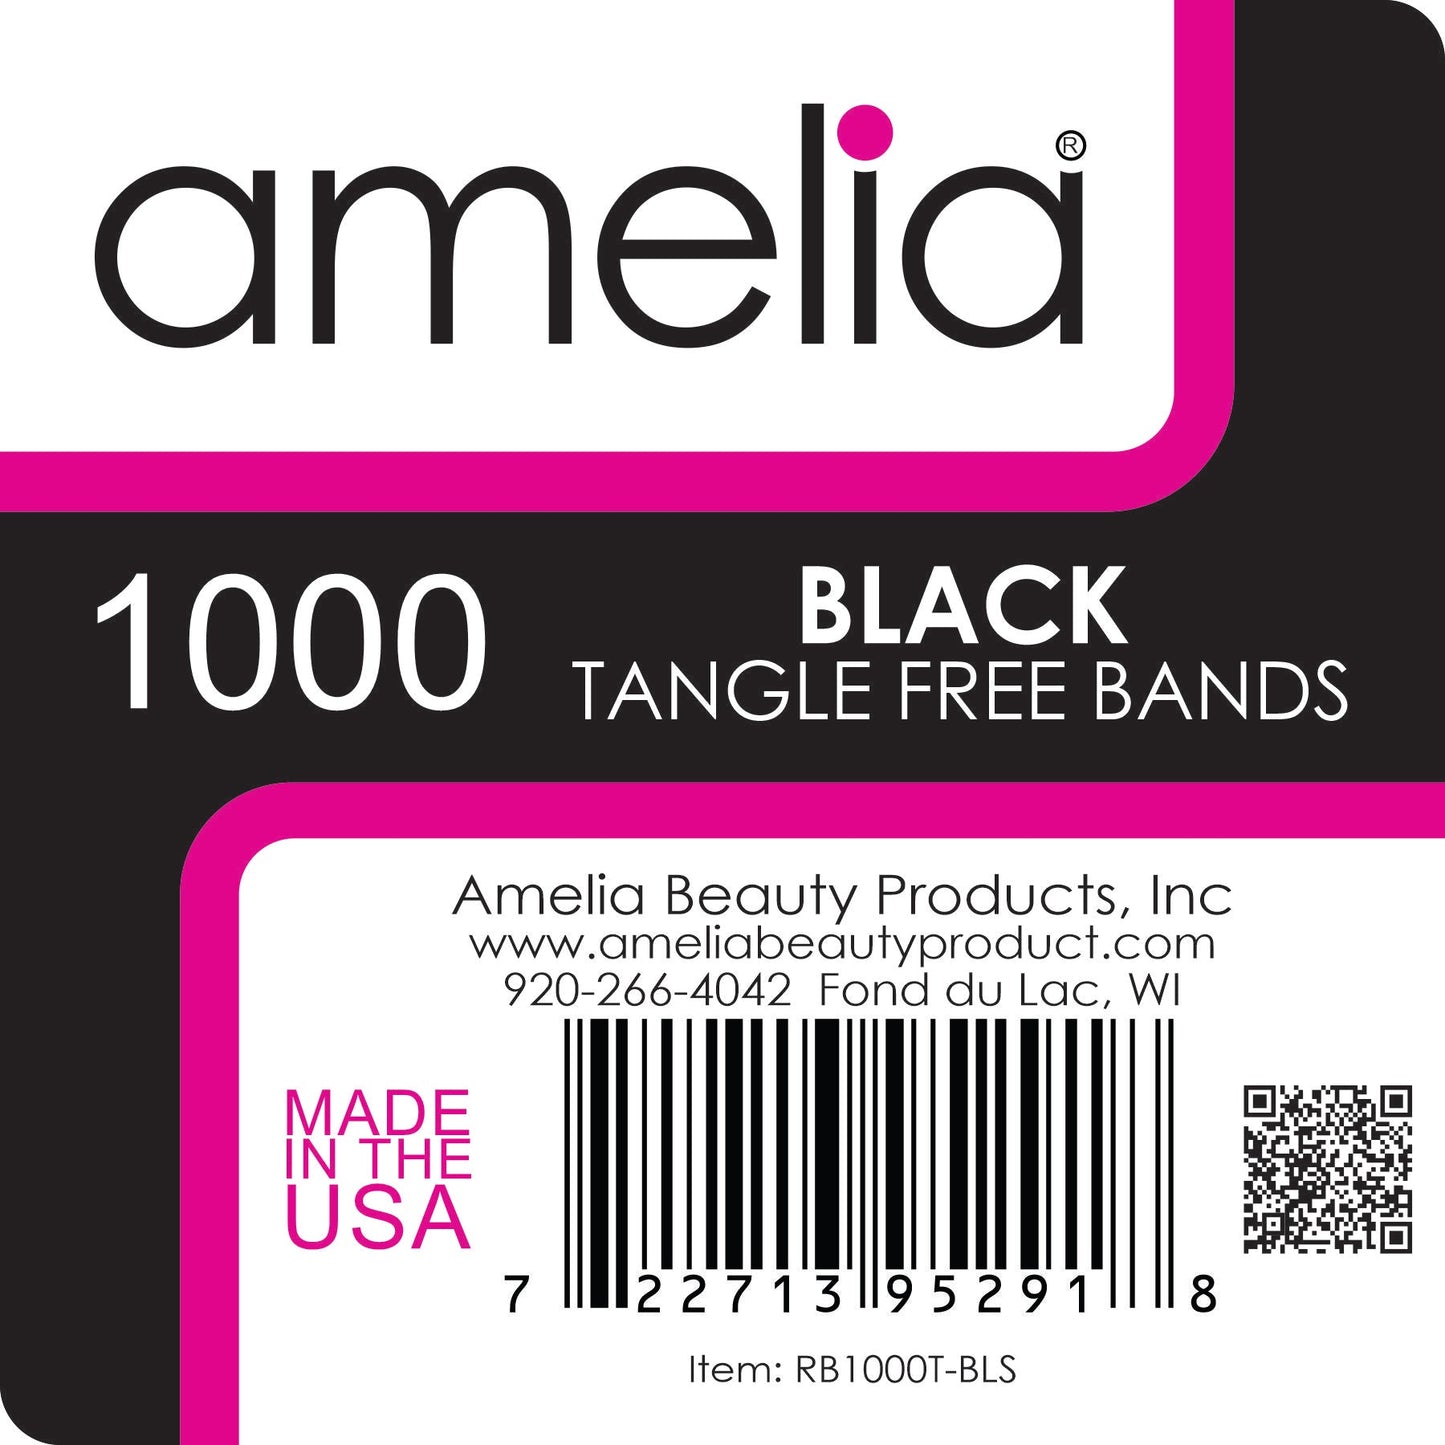 Amelia Beauty | 1/2in, Black, Tangle Free Elastic Pony Tail Holders | Made in USA, Ideal for Ponytails, Braids, Twists. For Women, Girls. Pain Free, Snag Free, Easy Off | 1000 Pack - 12 Retail Packs